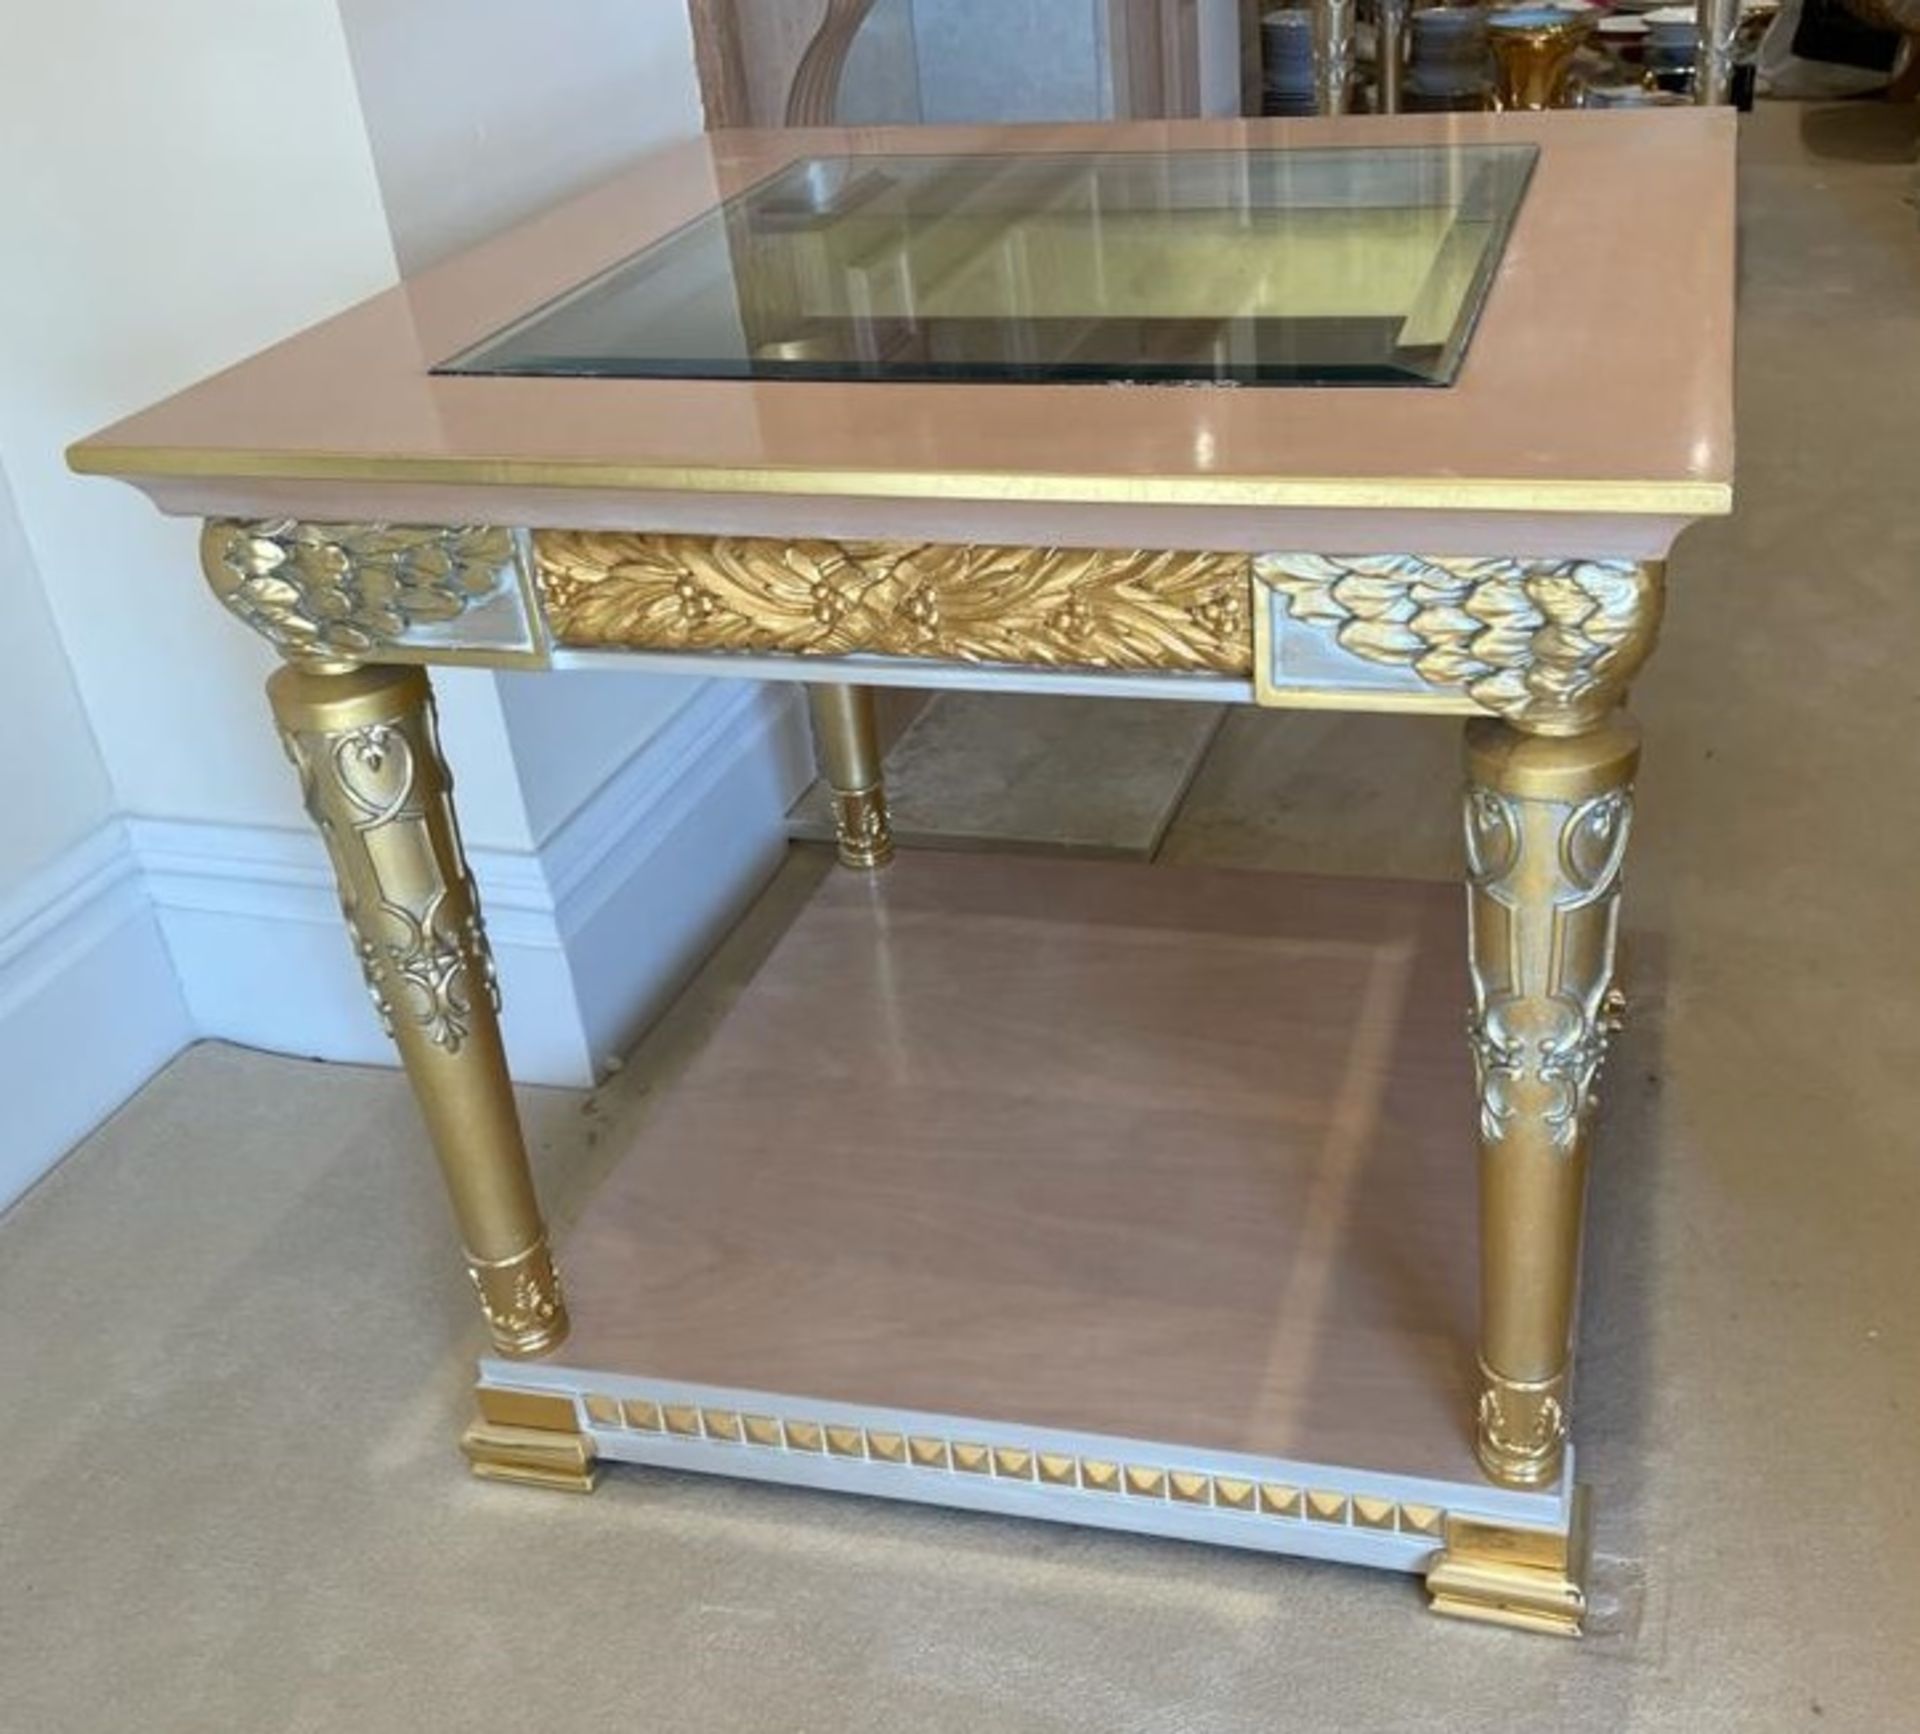 2 x Hand Carved Ornate Side Tables Complimented With Birchwood Veneer, Golden Pillar Legs, Carved - Image 7 of 13